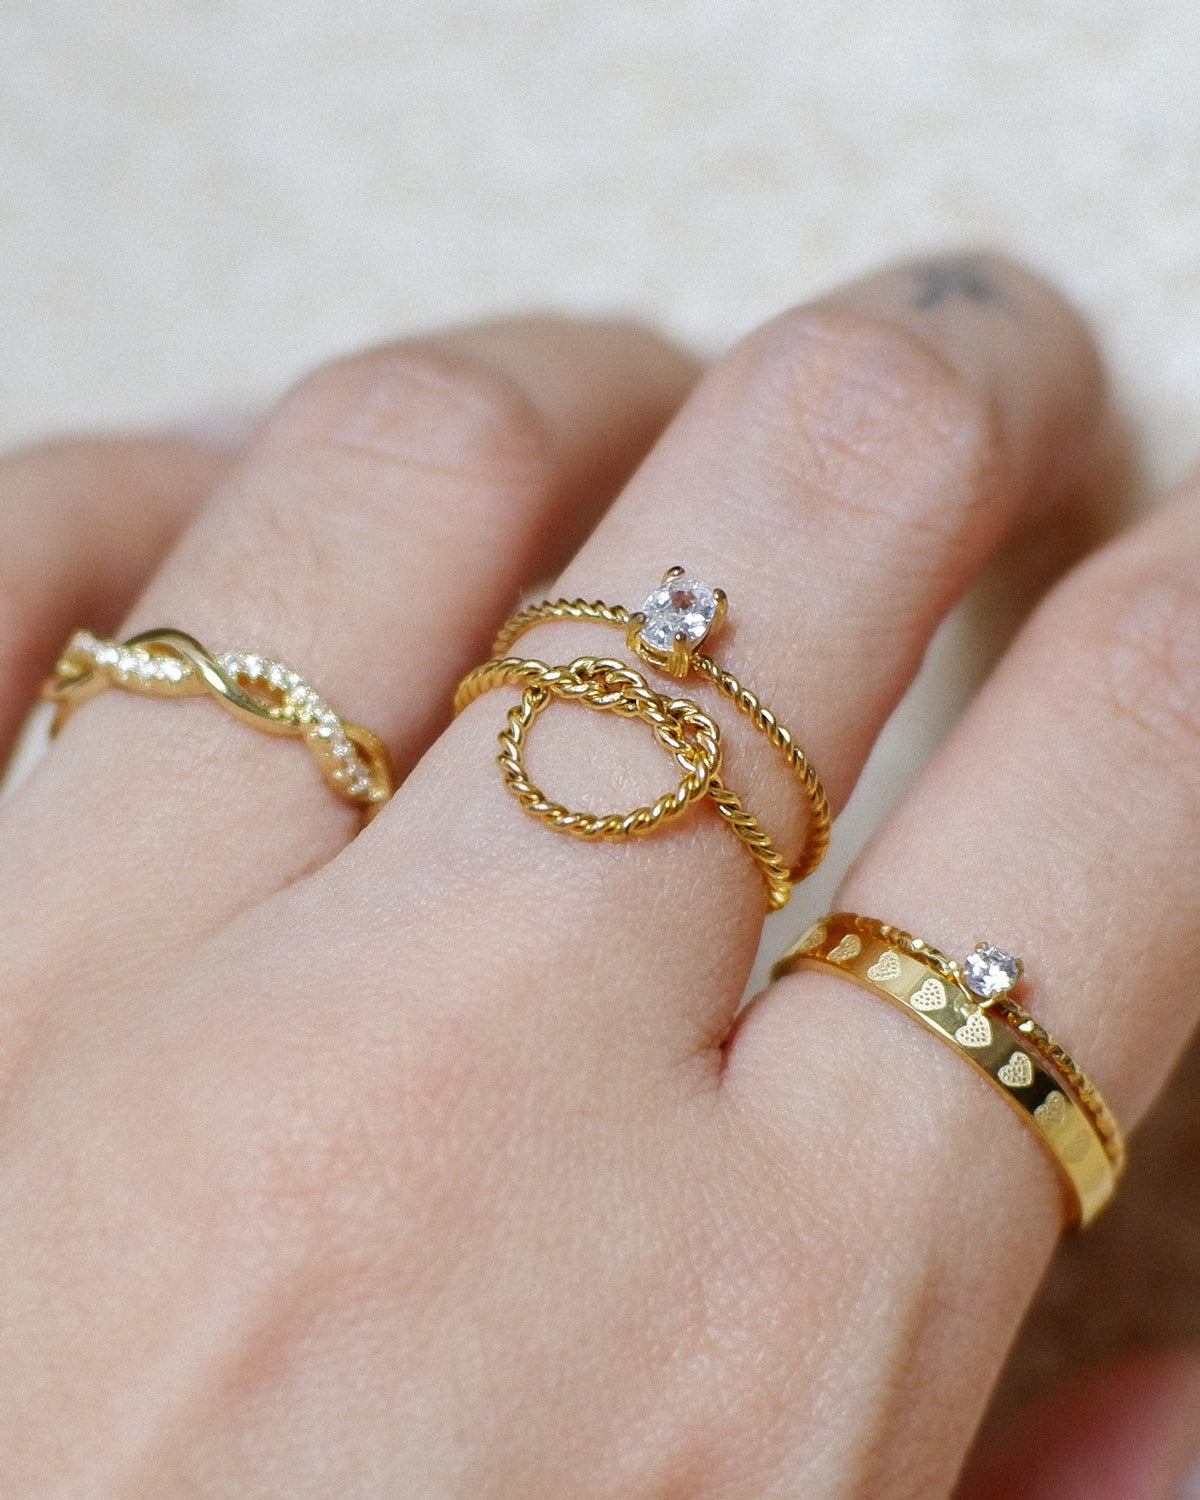 The Brenna Knot Ring